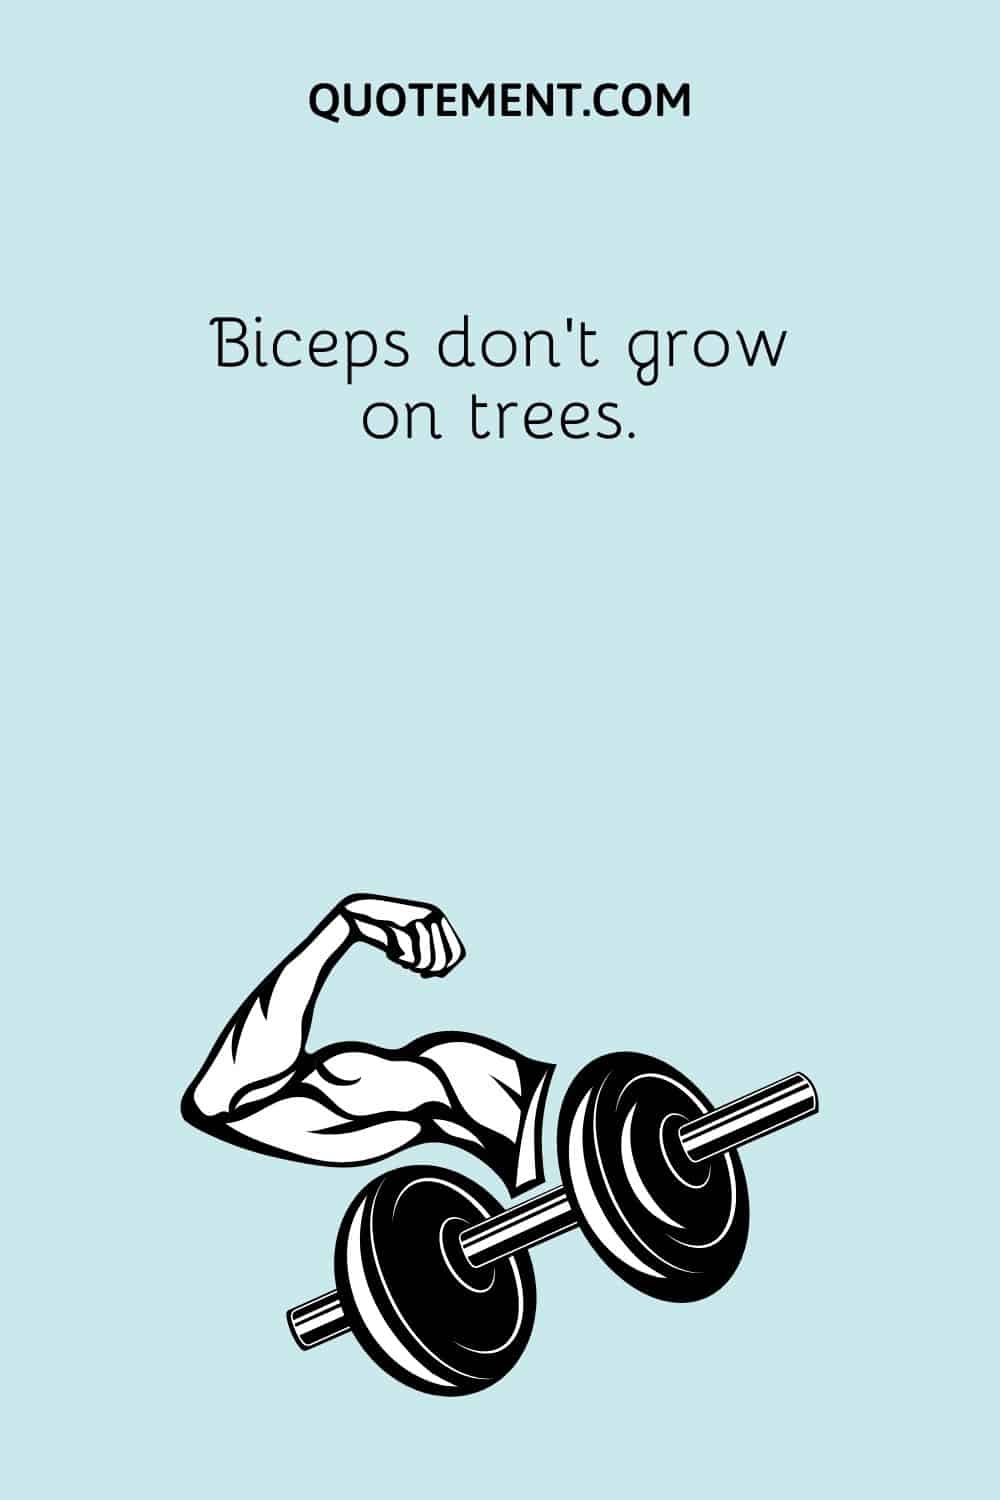 Biceps don’t grow on trees.